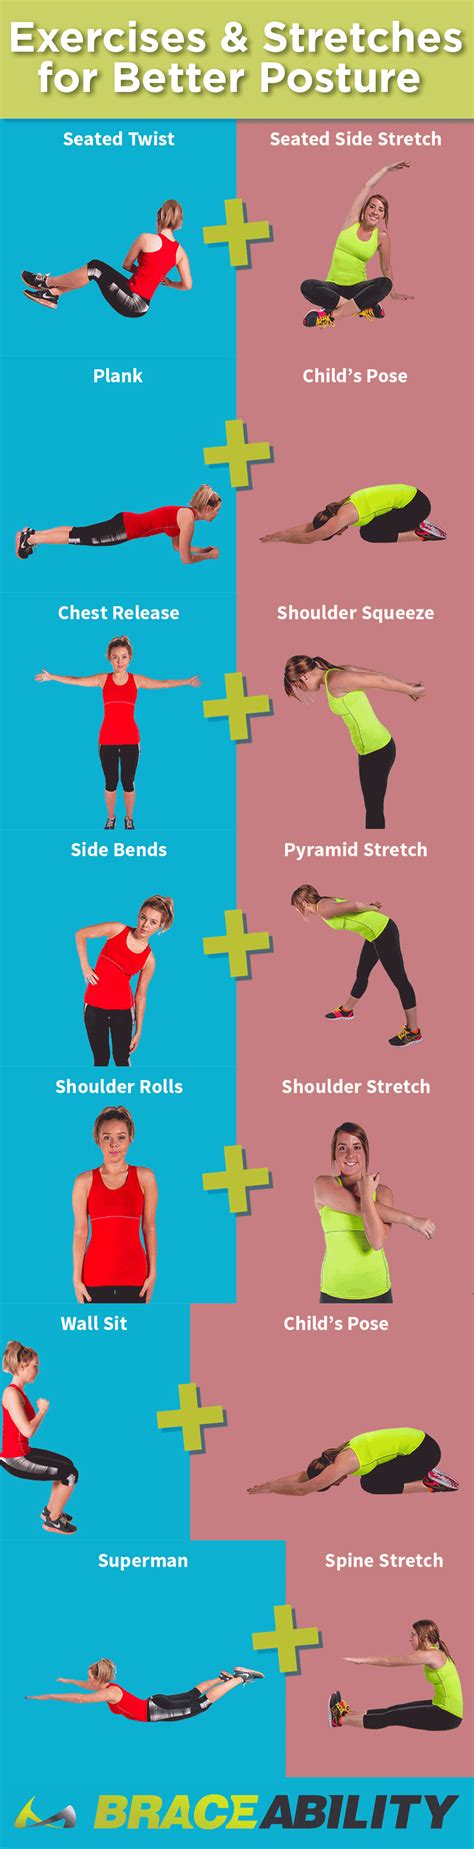 21 Day Posture Challenge Exercises And Stretches To Stand Up Straight